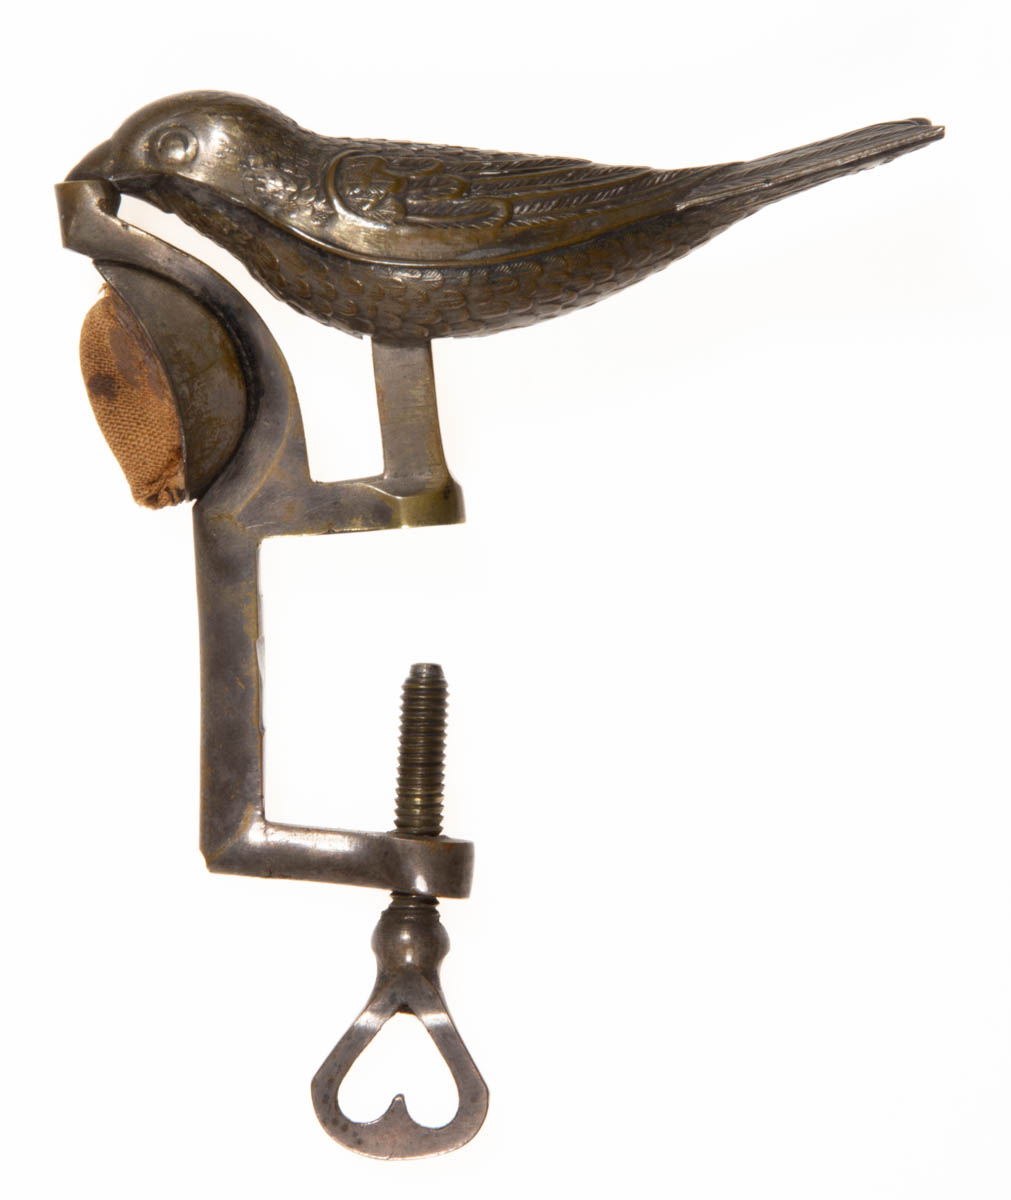 A. GEROULD STAMPED AND CAST-METAL FIGURAL SEWING BIRD CLAMP WITH PINCUSHION HOLDER